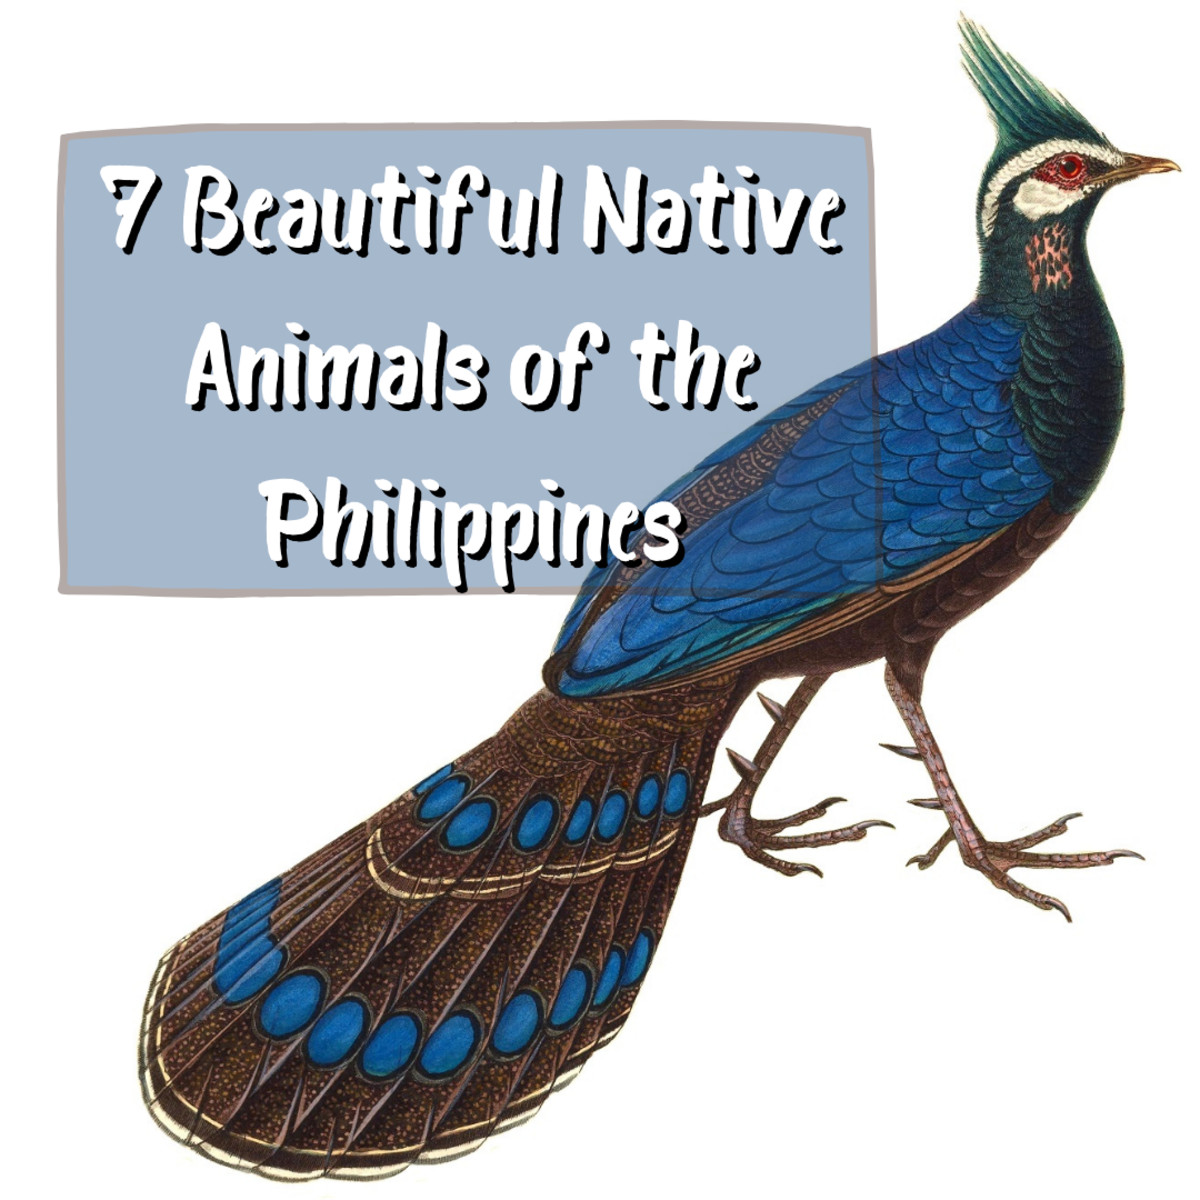 7 Most Beautiful and Amazing Animals of the Philippines